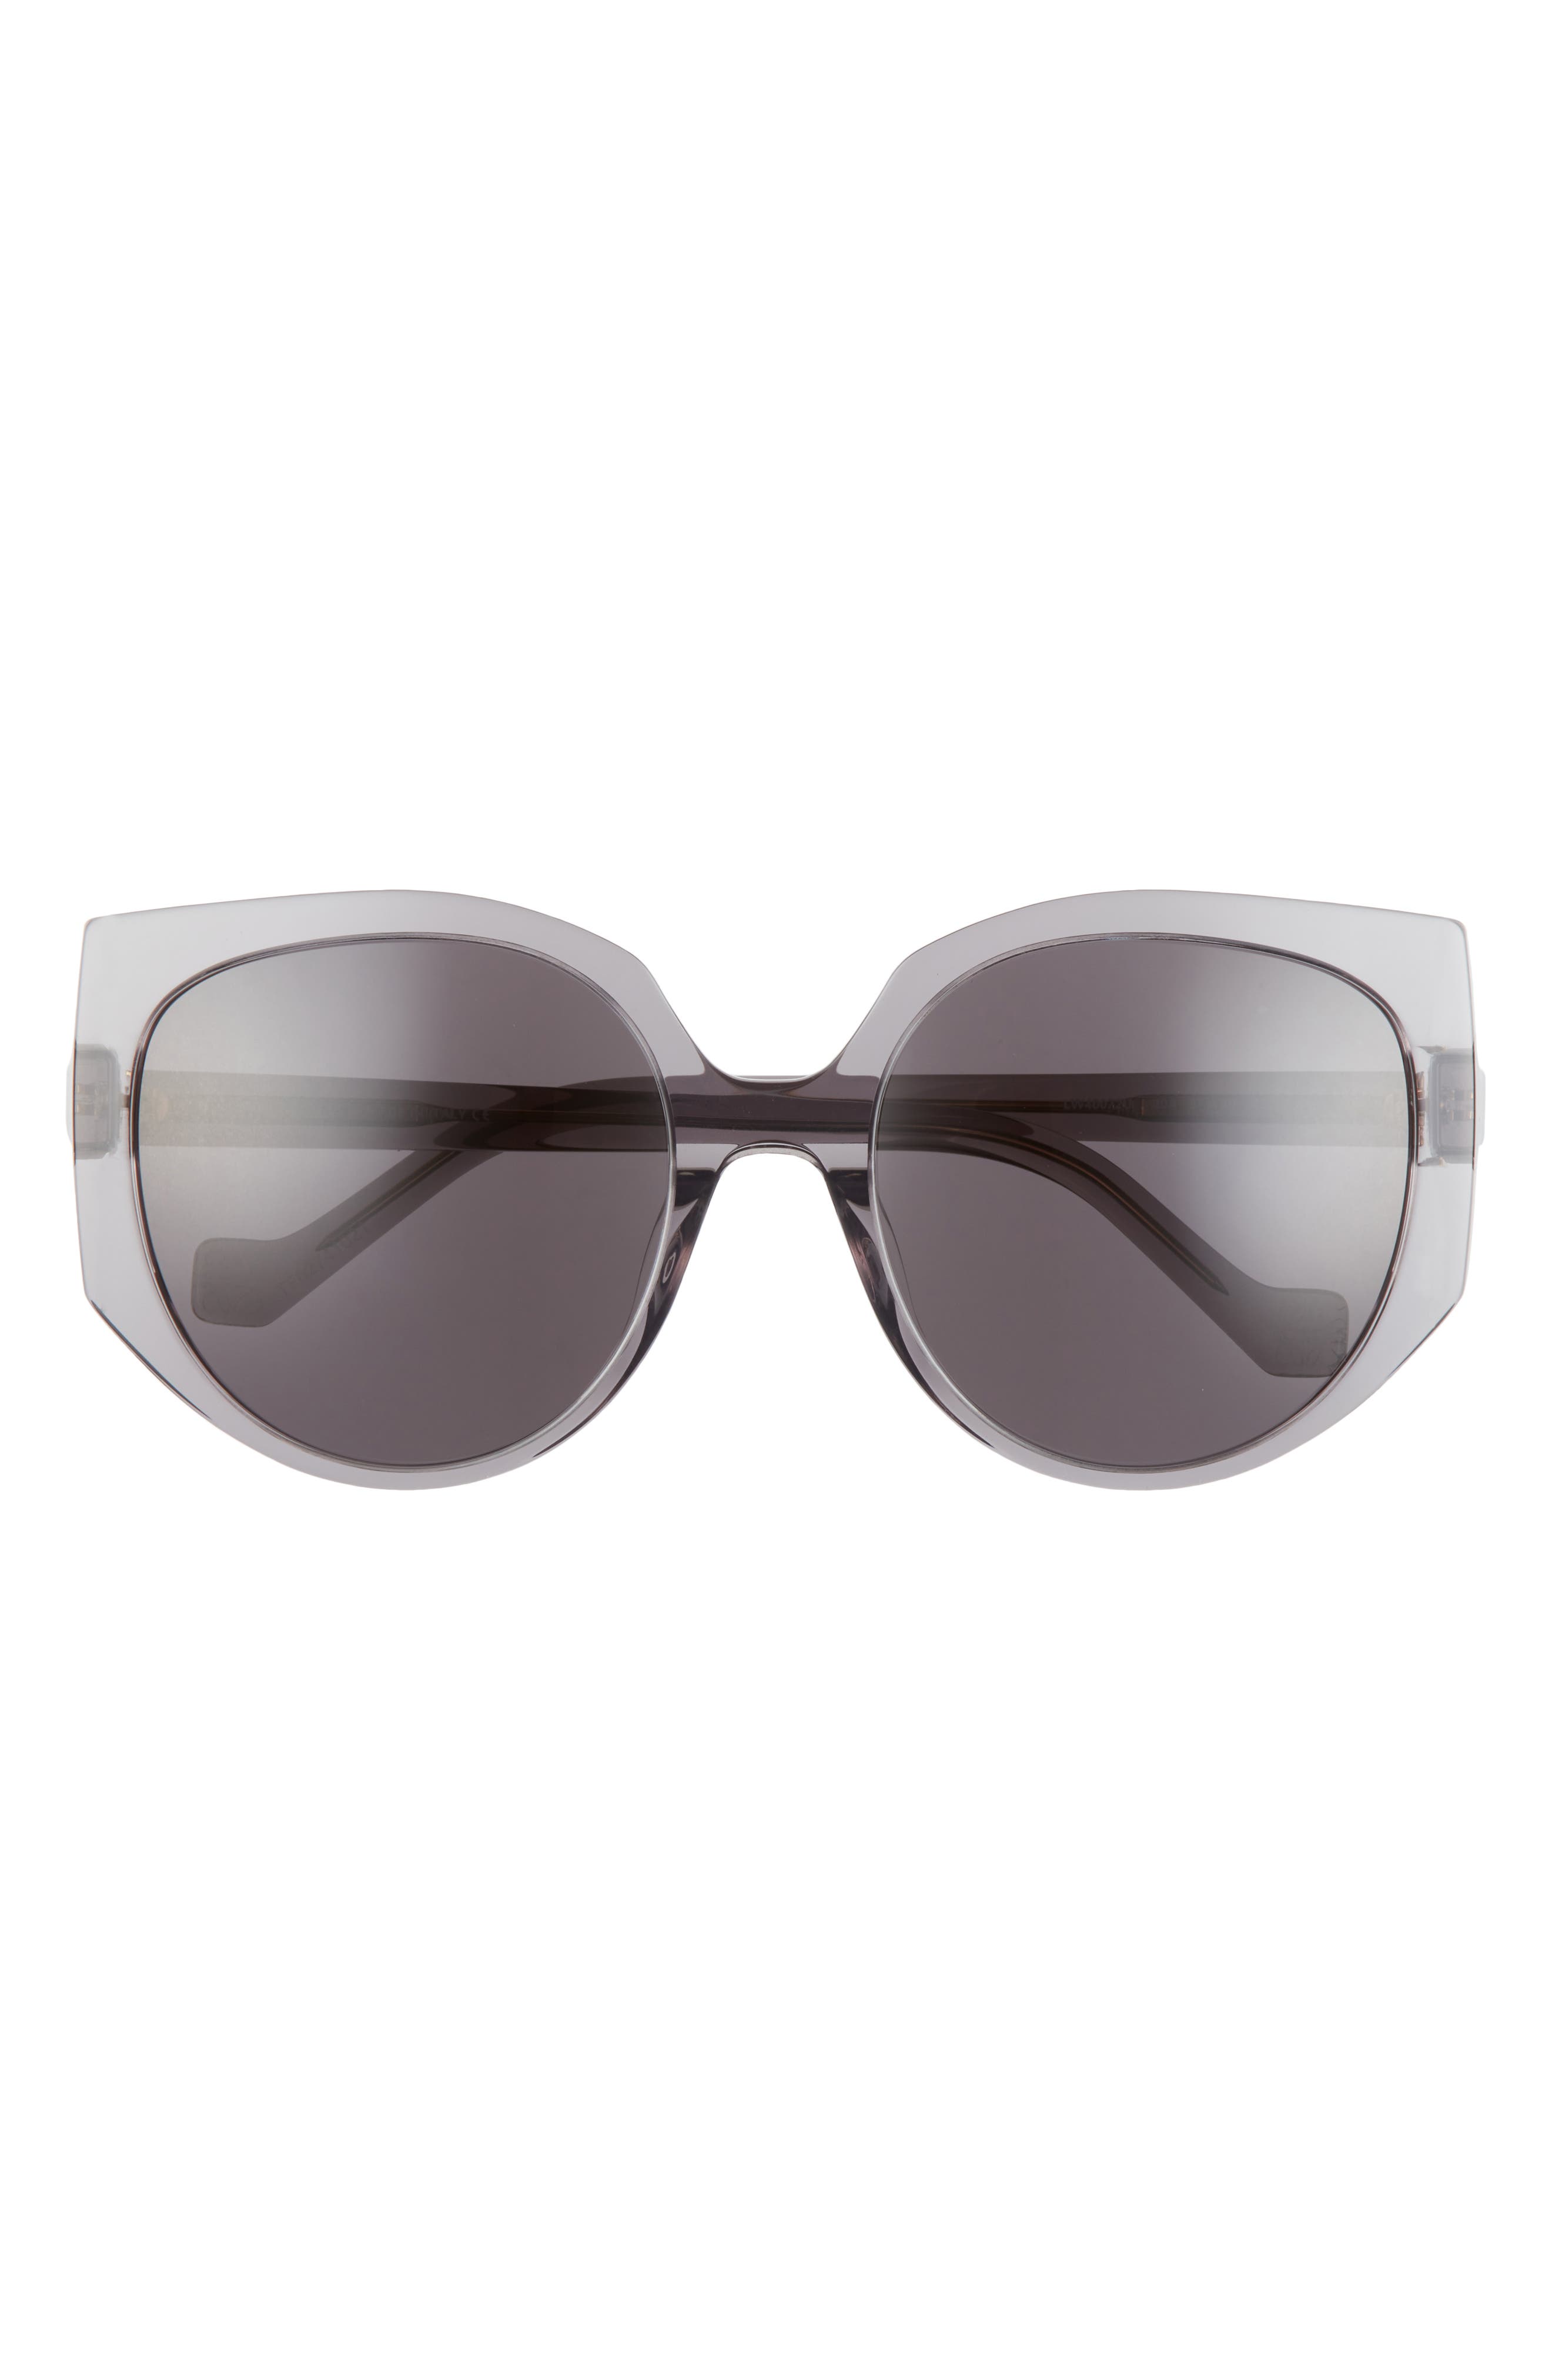 Loewe 57mm Oversize Cat Eye Sunglasses in Grey/Other /Smoke at Nordstrom